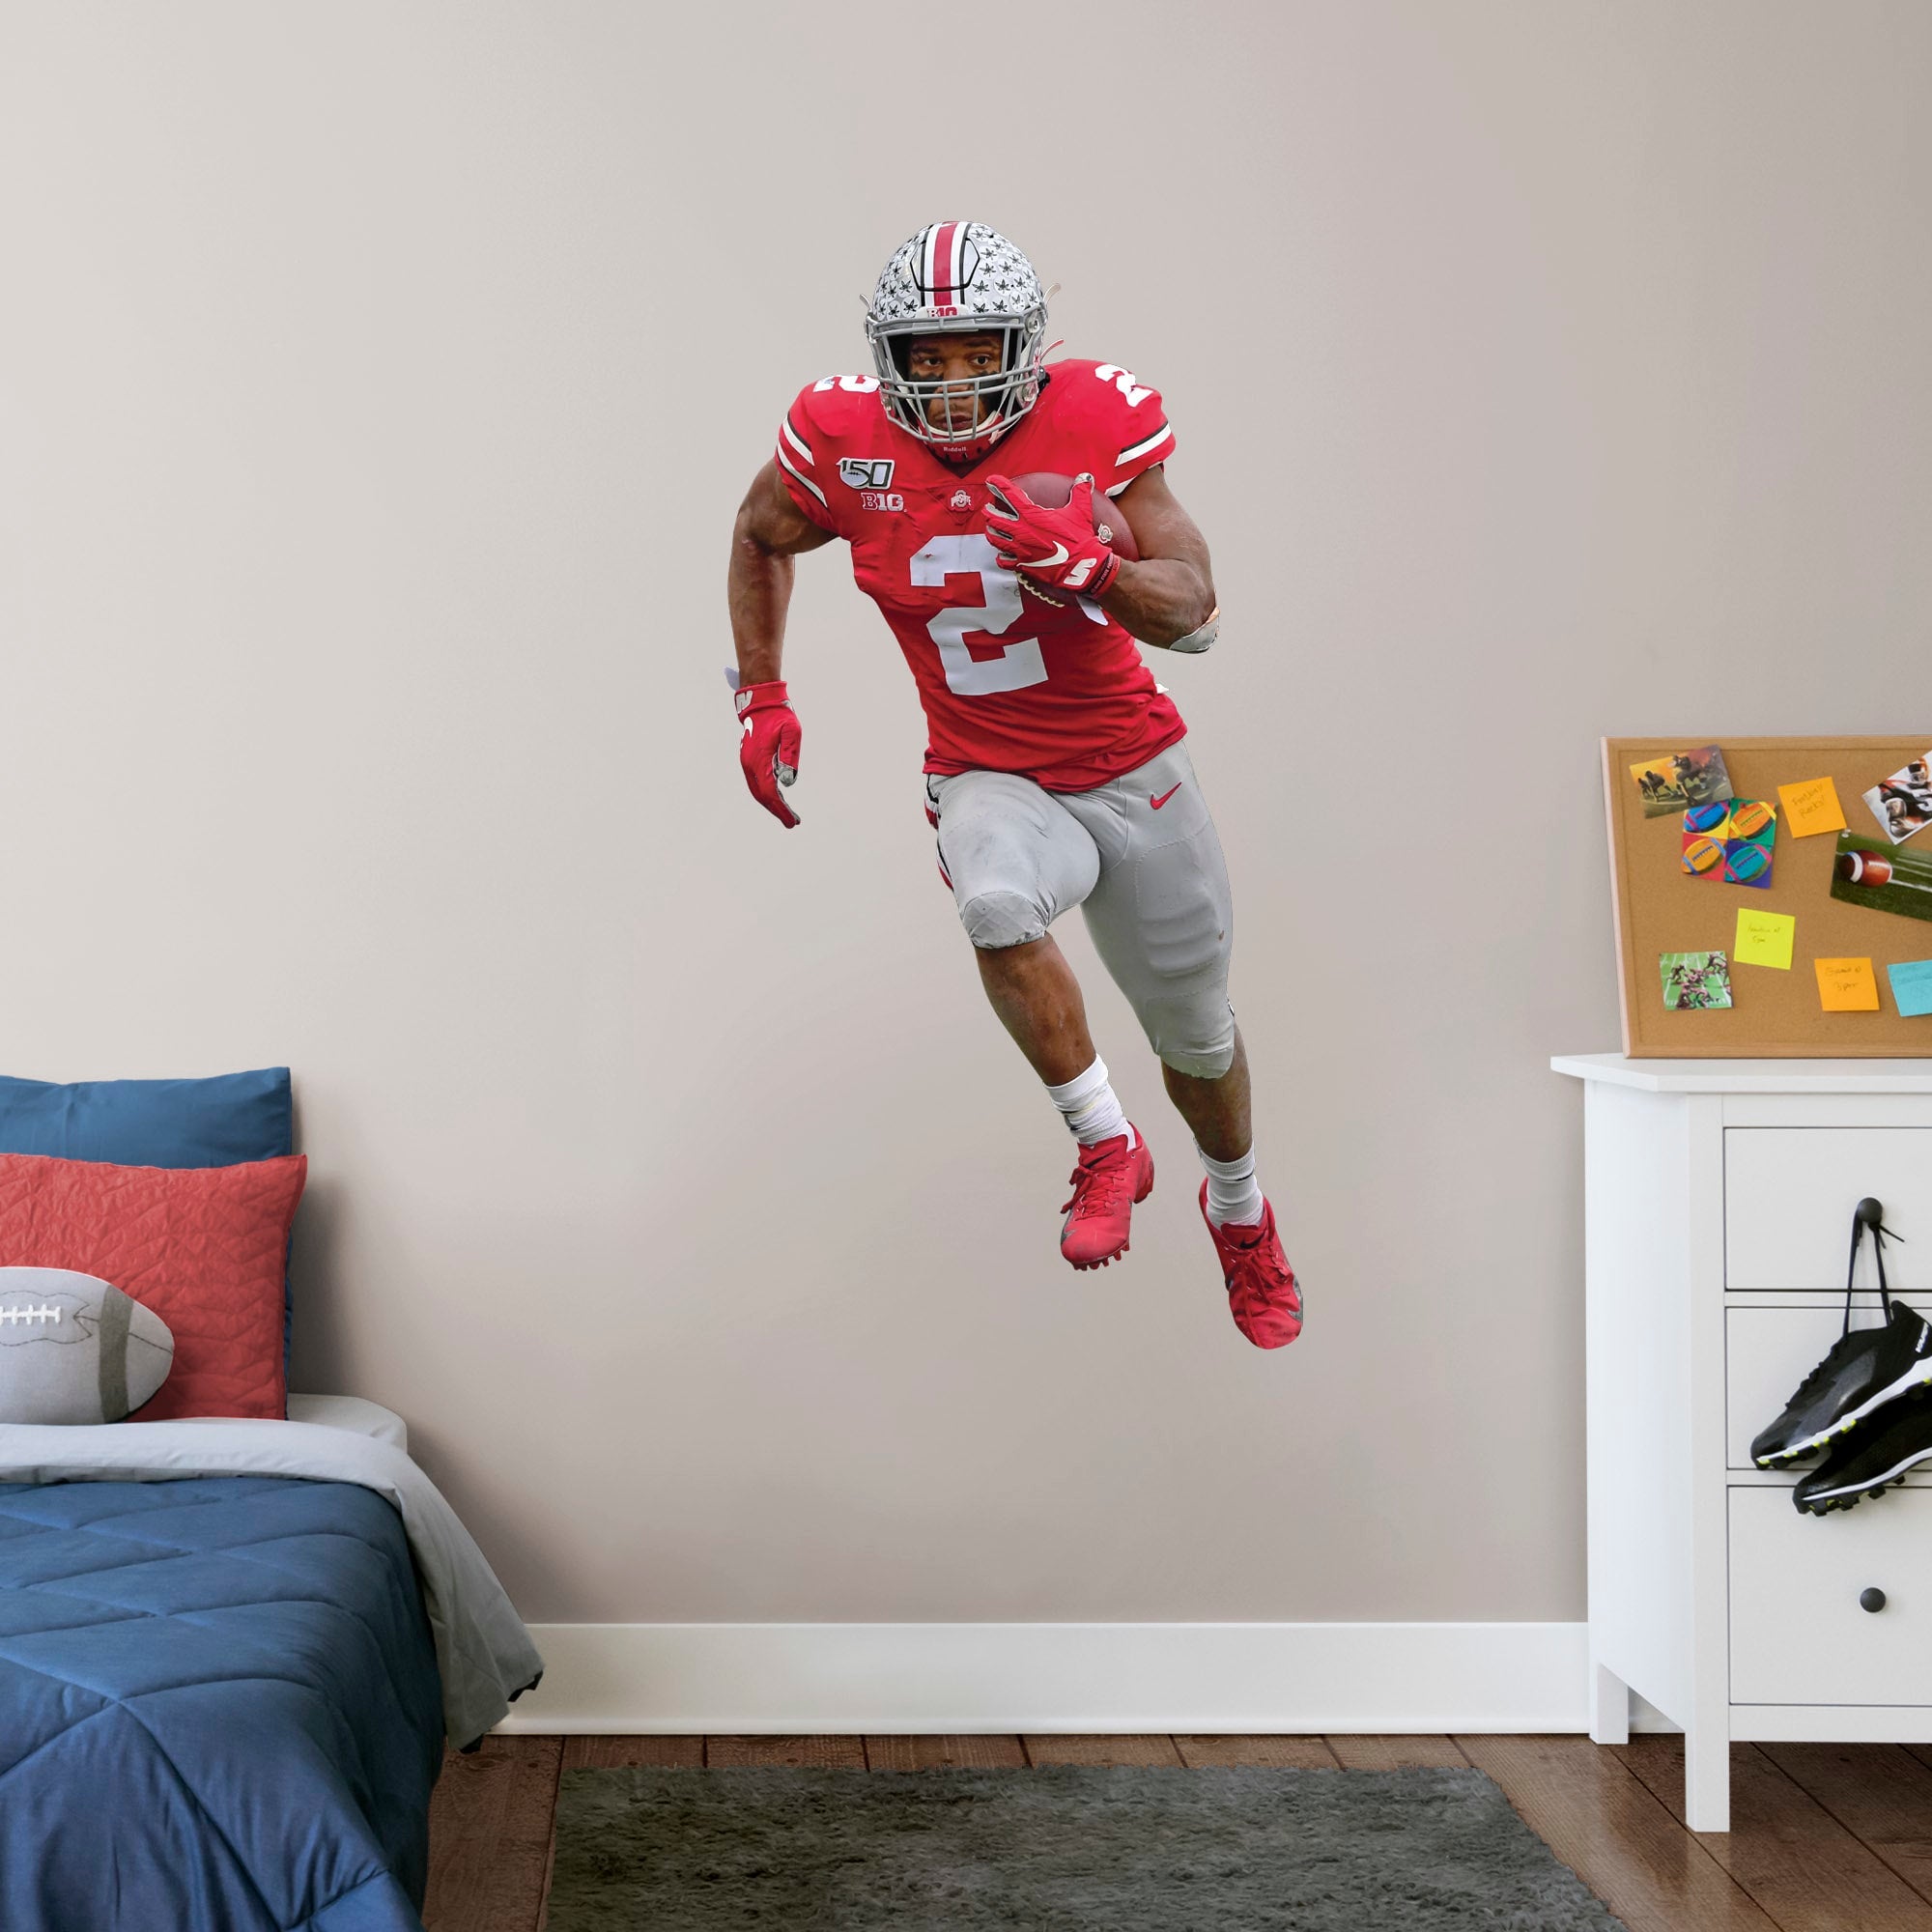 J.K. Dobbins for Ohio State Buckeyes: Ohio State - Officially Licensed Removable Wall Decal Giant Athlete + 2 Decals (26"W x 51"